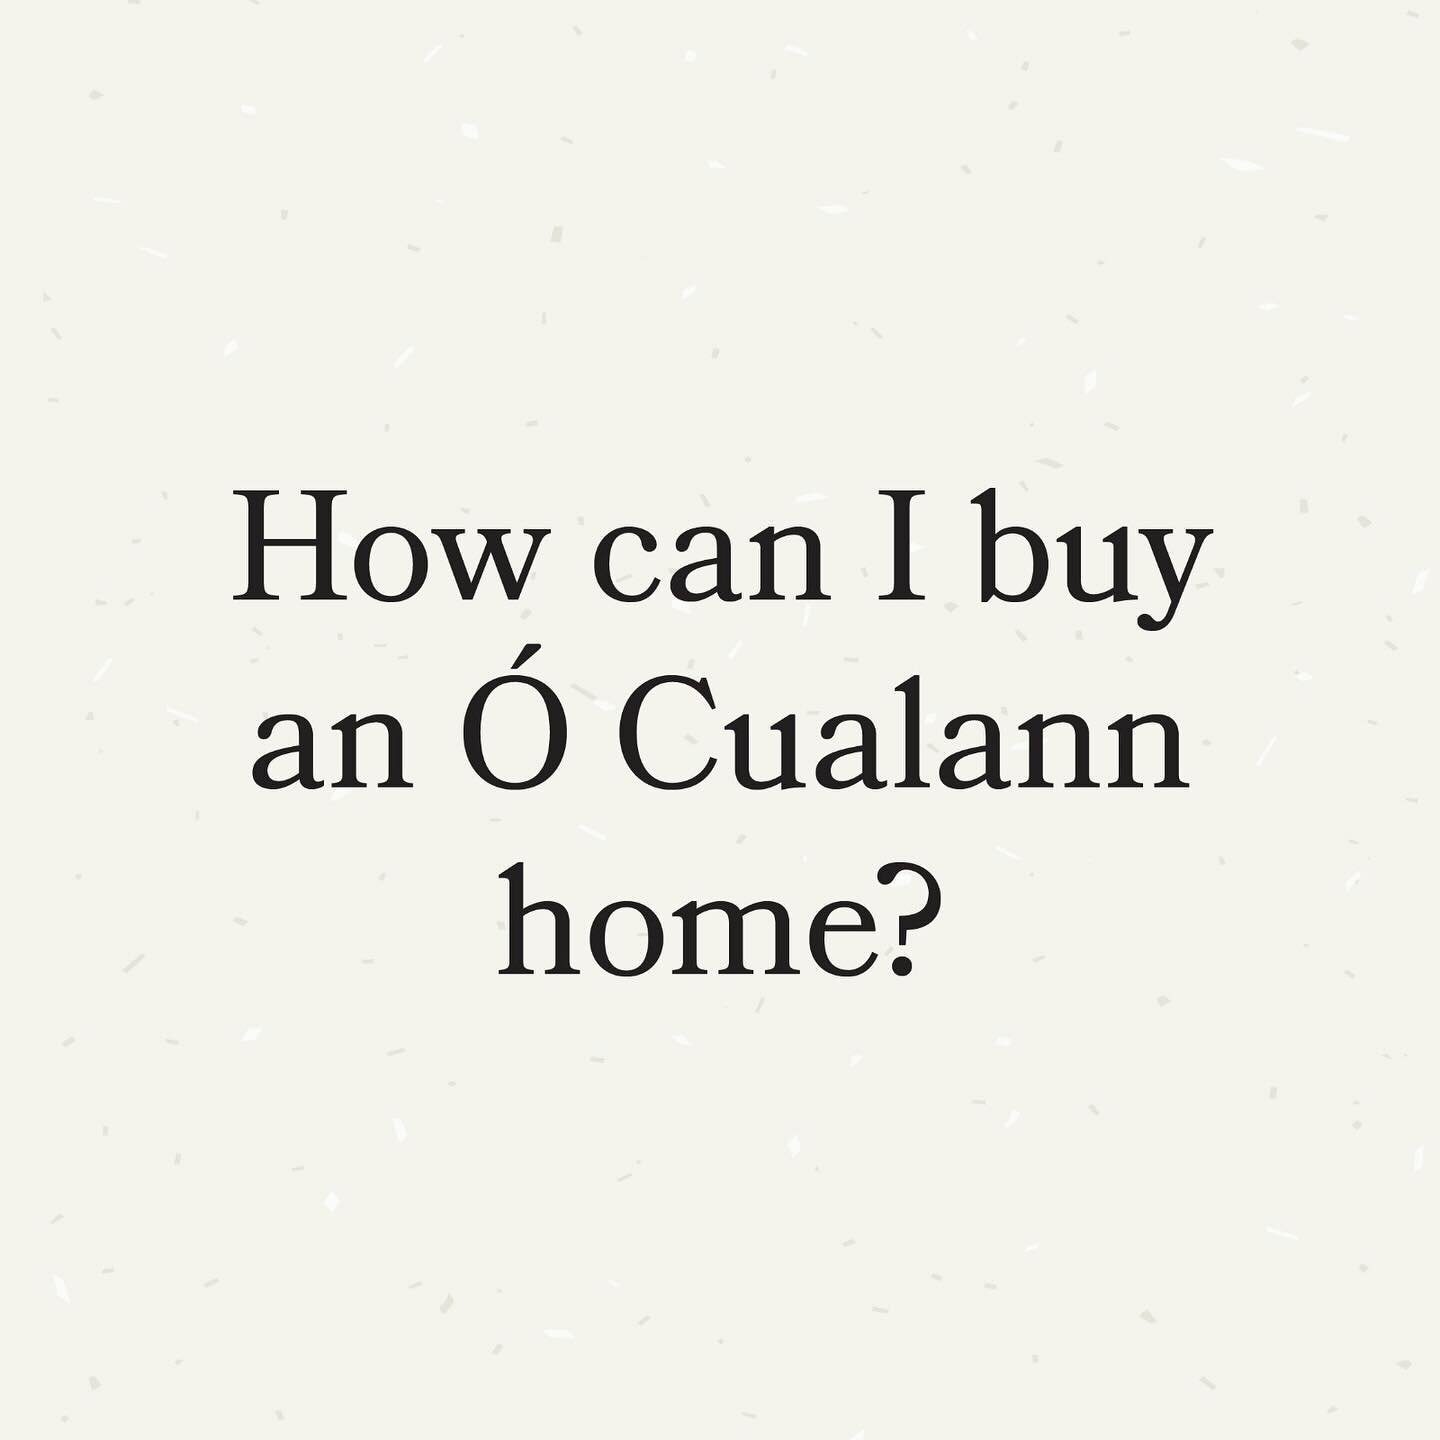 Affordable Housing is now allocated by Local Authorities. 
Here are some steps you can take to apply for an affordable home and spread the word of &Oacute; Cualann.

#&Oacute;Cualann
#AffordableHousing
#The&Oacute;CualannModel